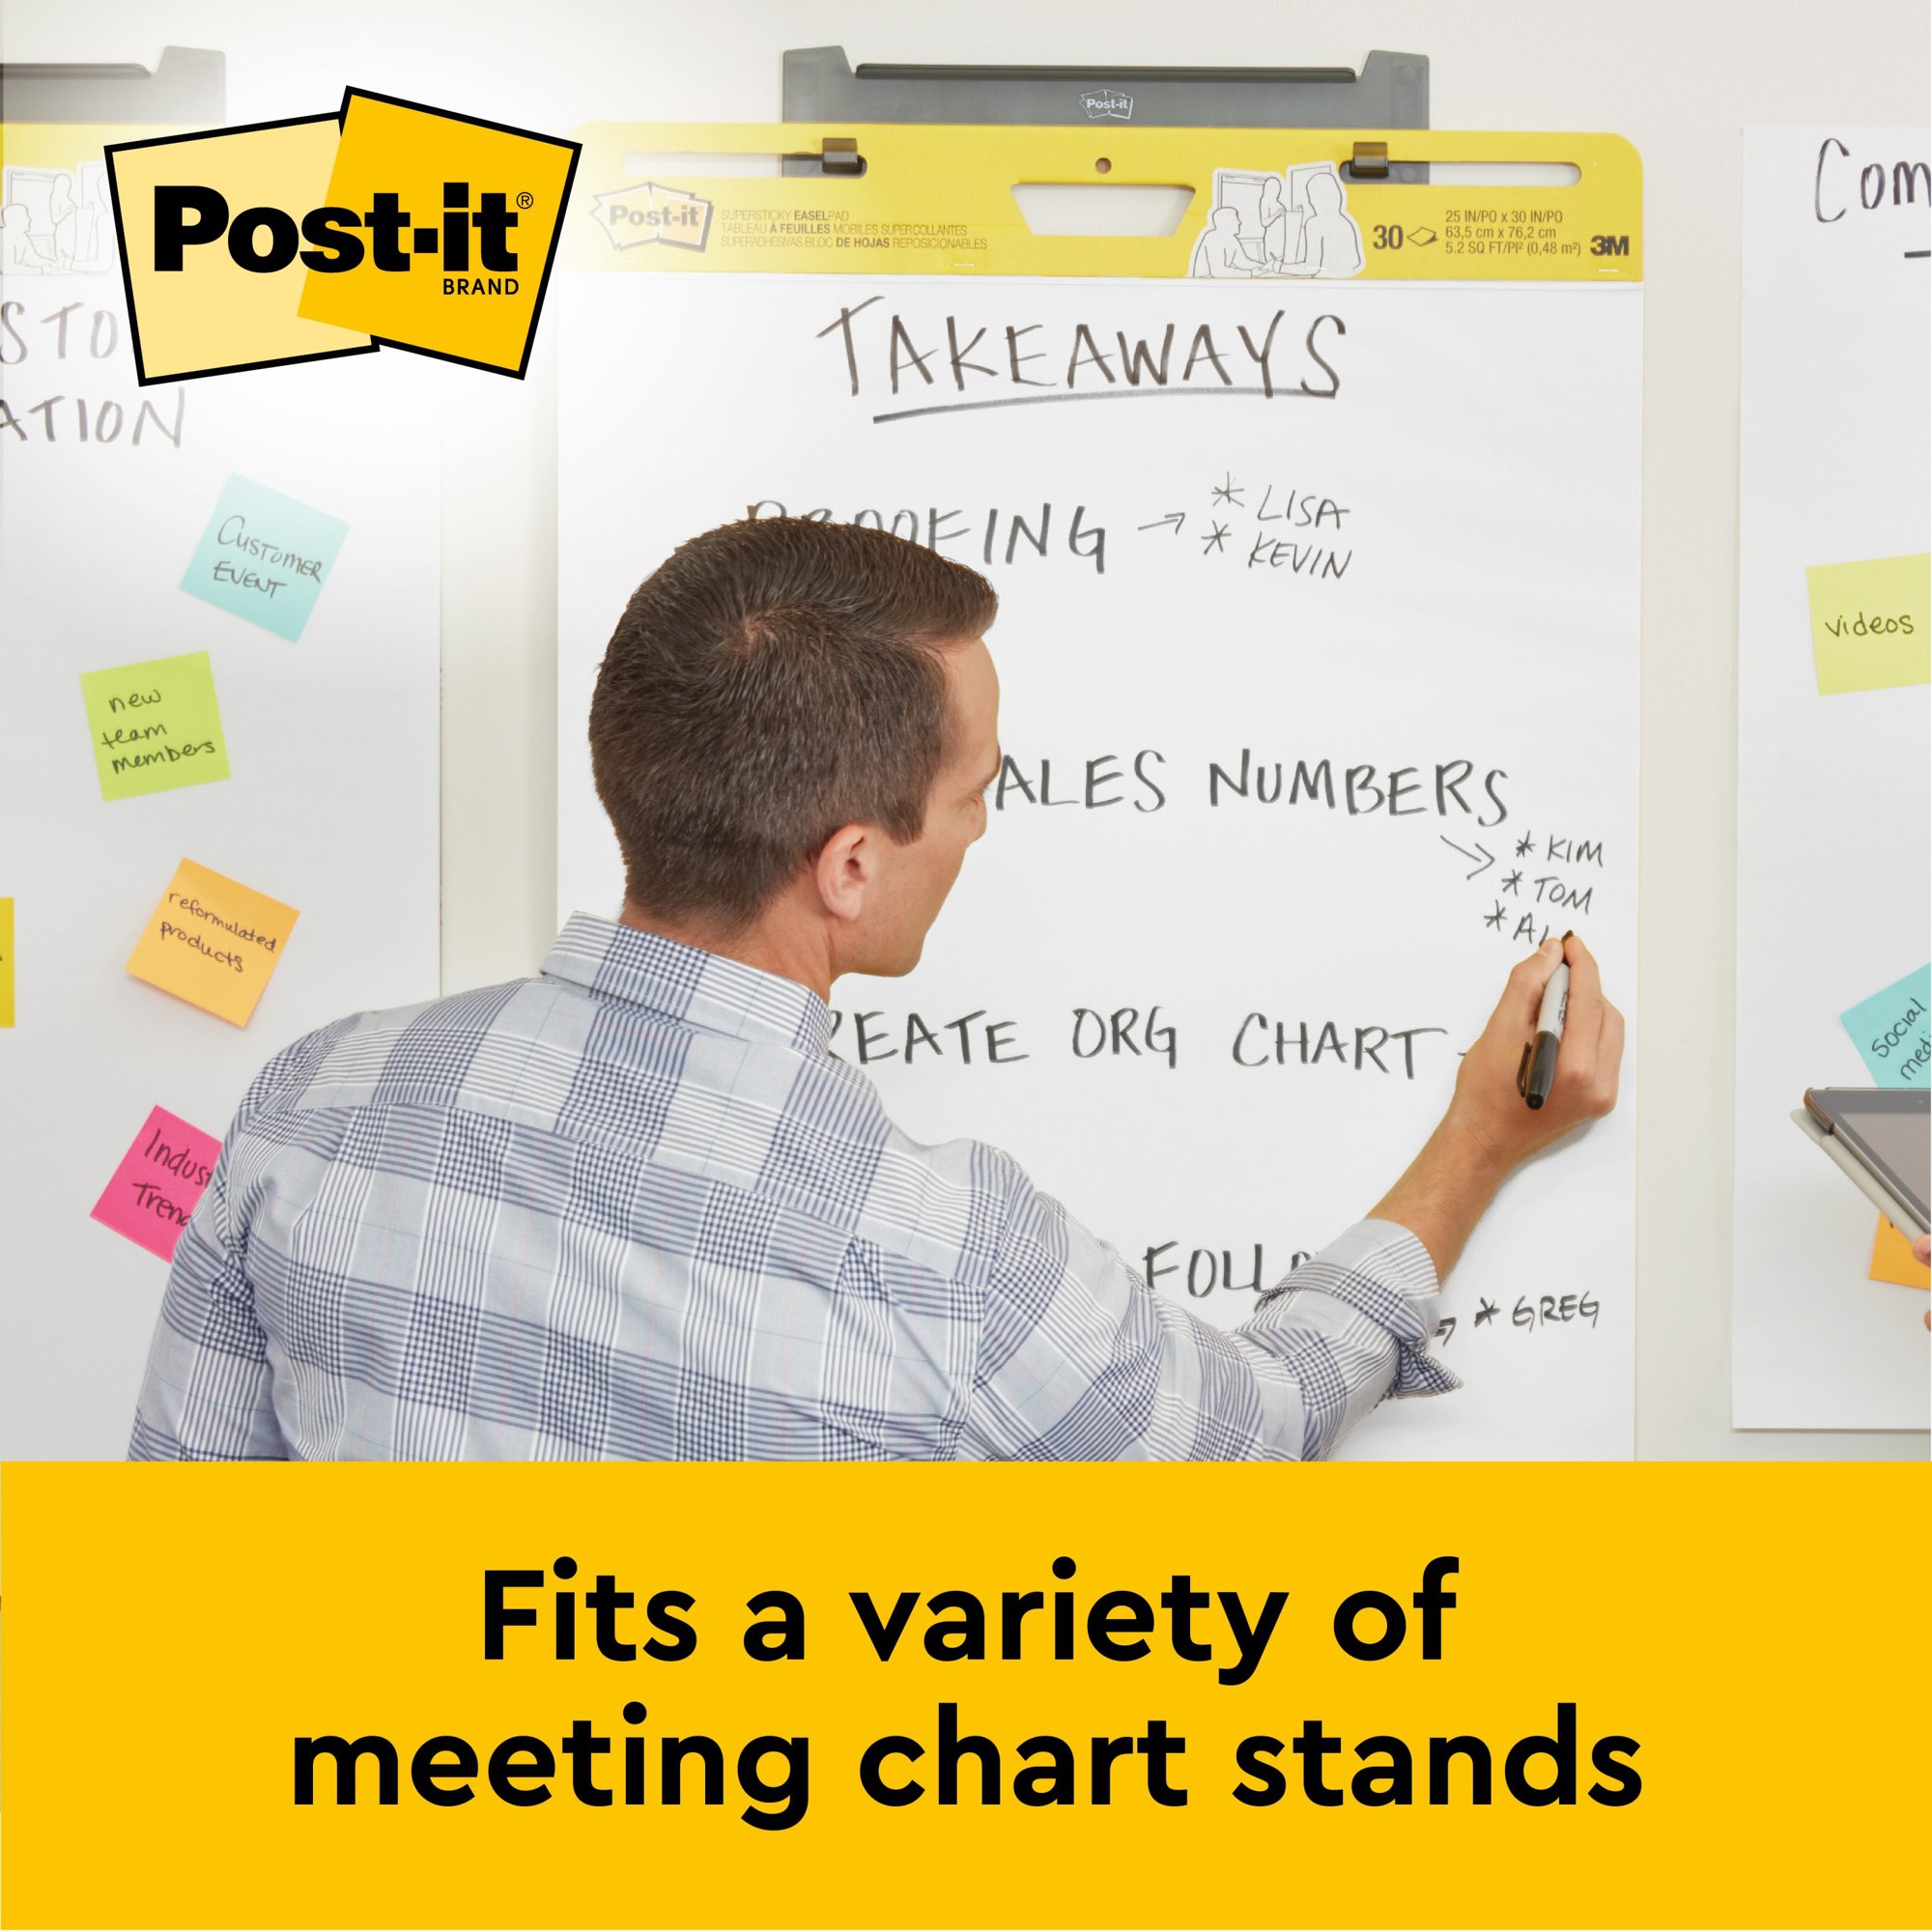 Post-it A1 Meeting Chart Self Adhesive Repositionable 30 Sheets